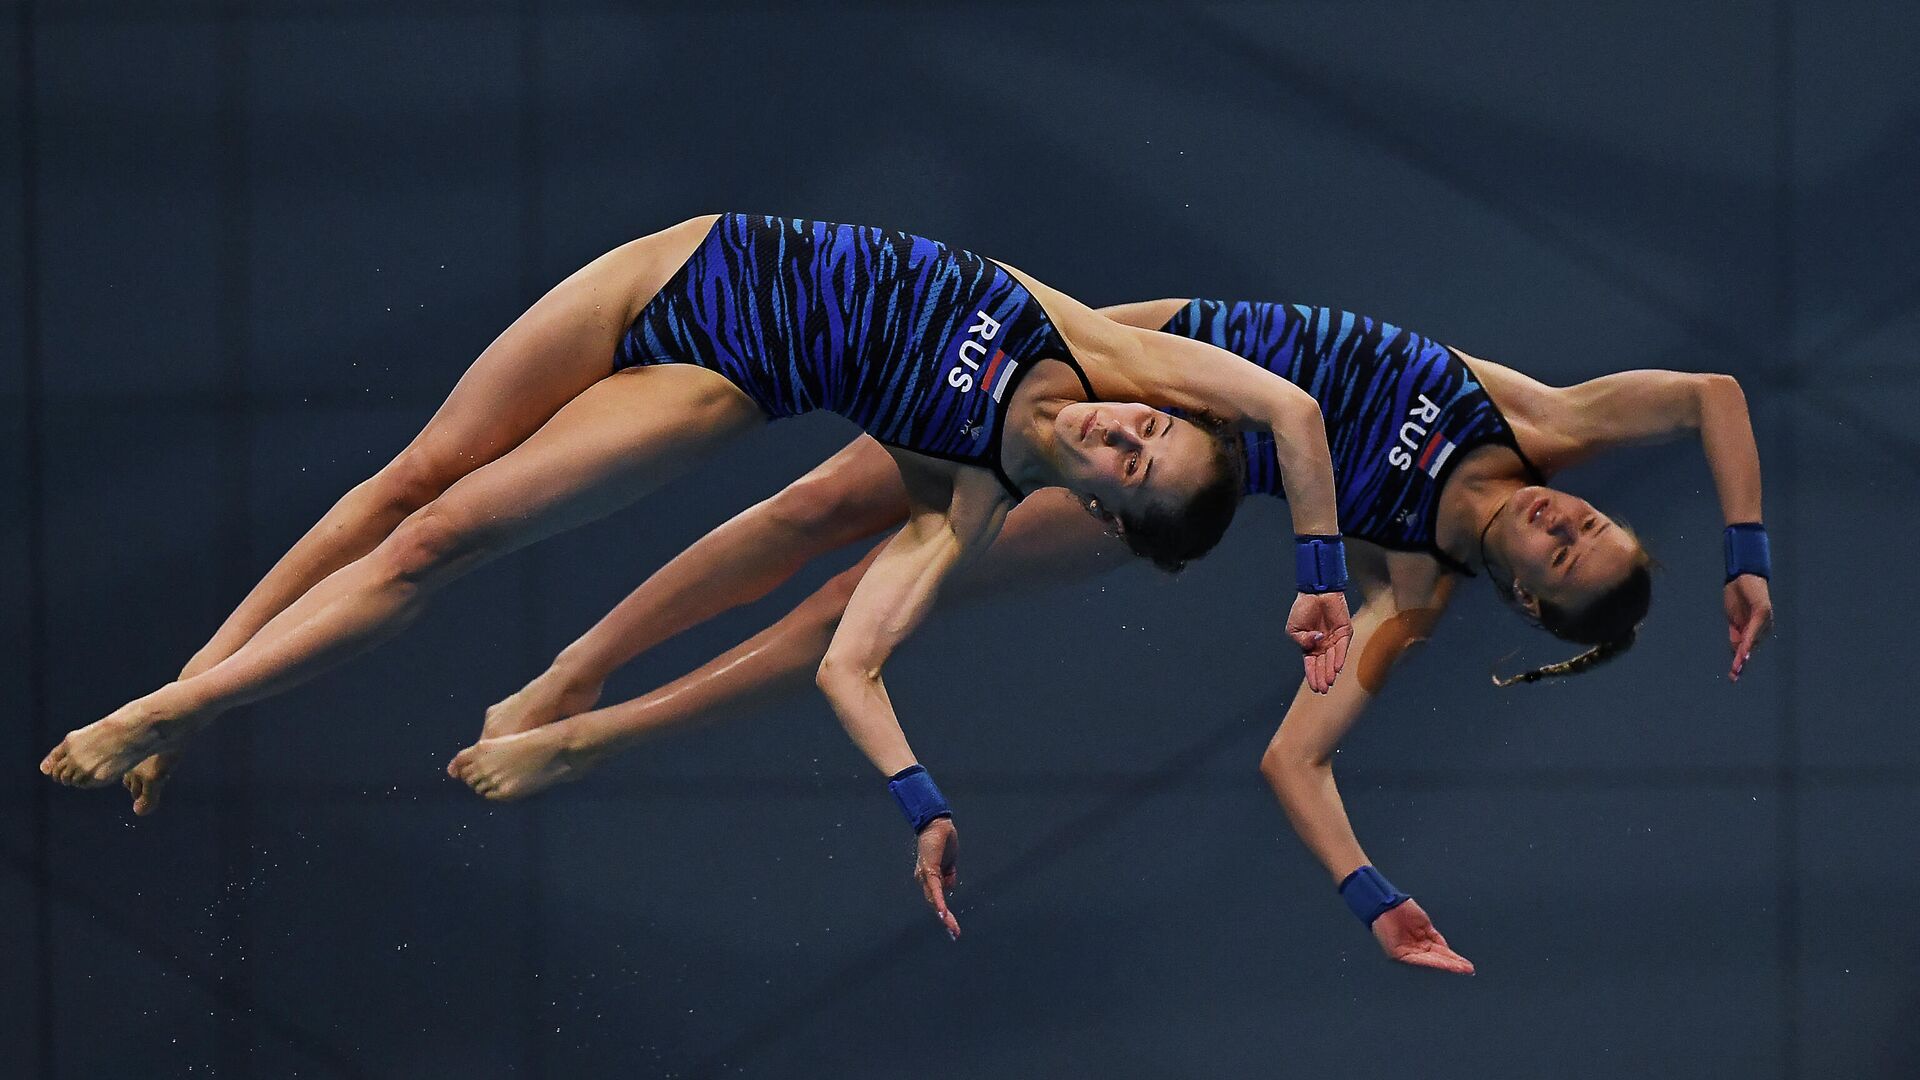 Russia's Iuliia Timoshinina (L) and Russia's Ekaterina Beliaeva compete in the Women's Synchronised 10m Platform Diving event during the LEN European Aquatics Championships at the Duna Arena in Budapest on May 14, 2021. (Photo by Attila KISBENEDEK / AFP) - РИА Новости, 1920, 14.05.2021